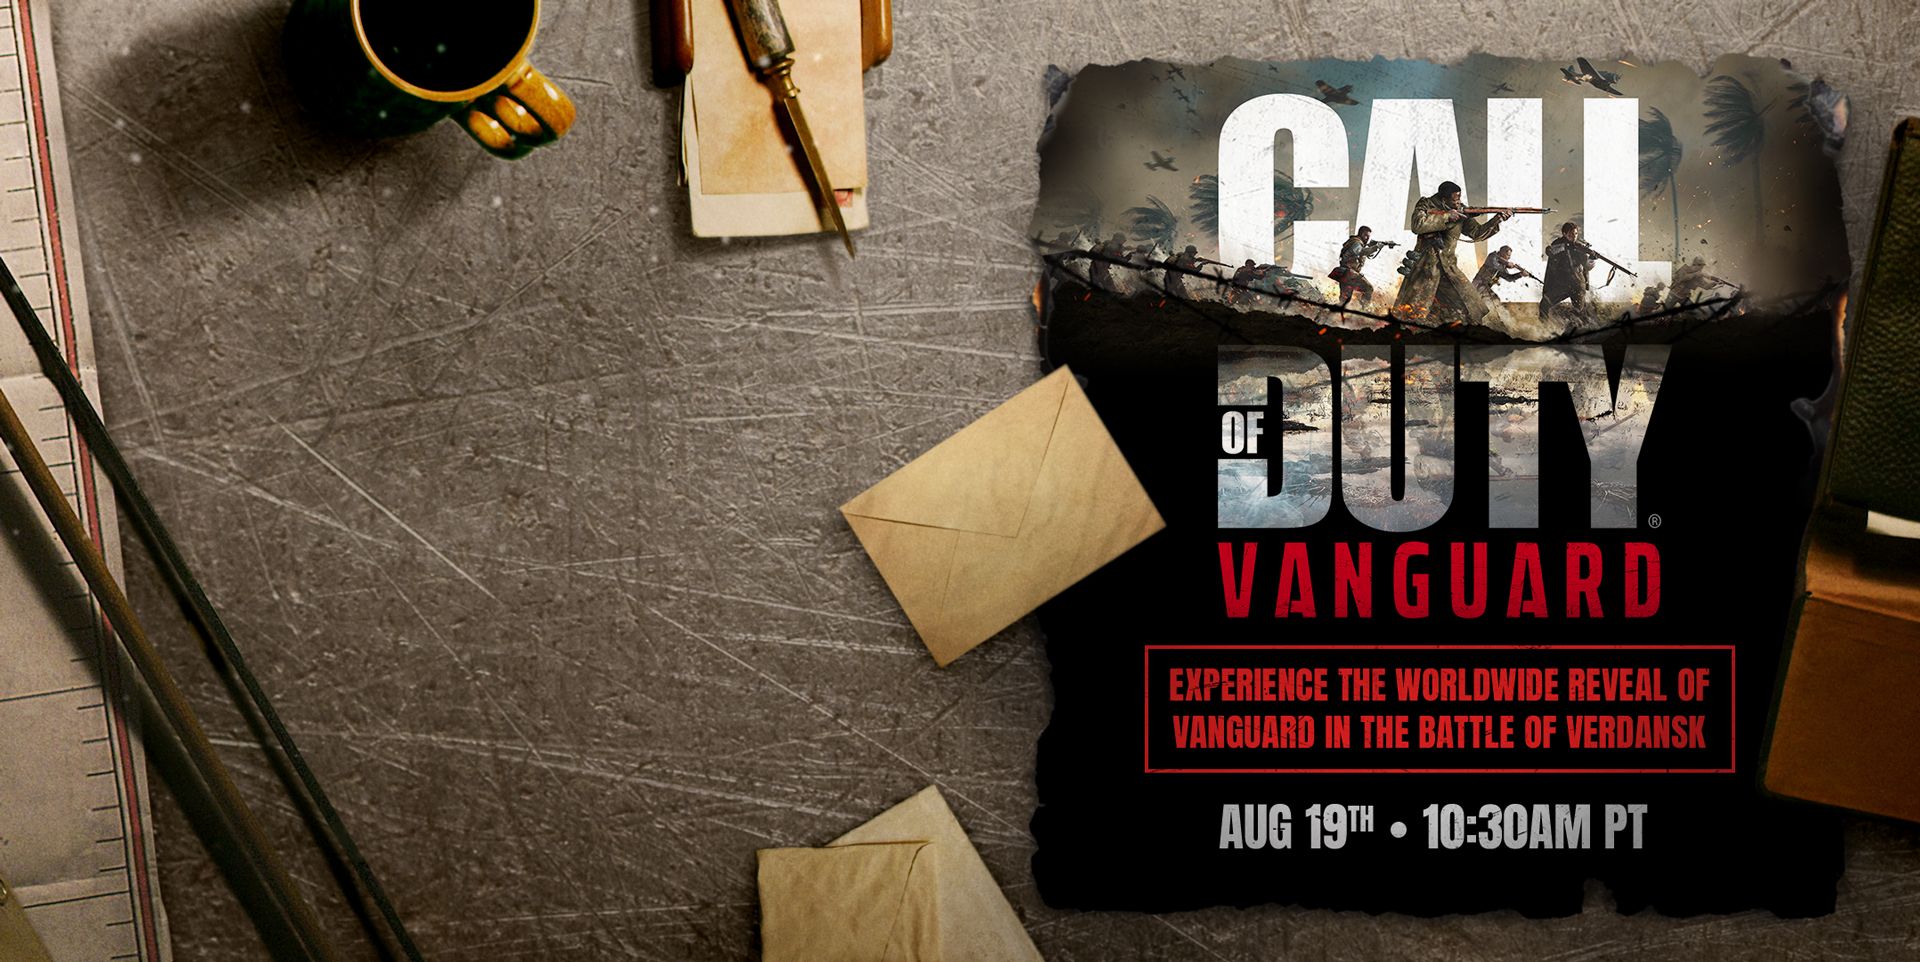 Call of Duty Vanguard Reveal Event in Warzone! 